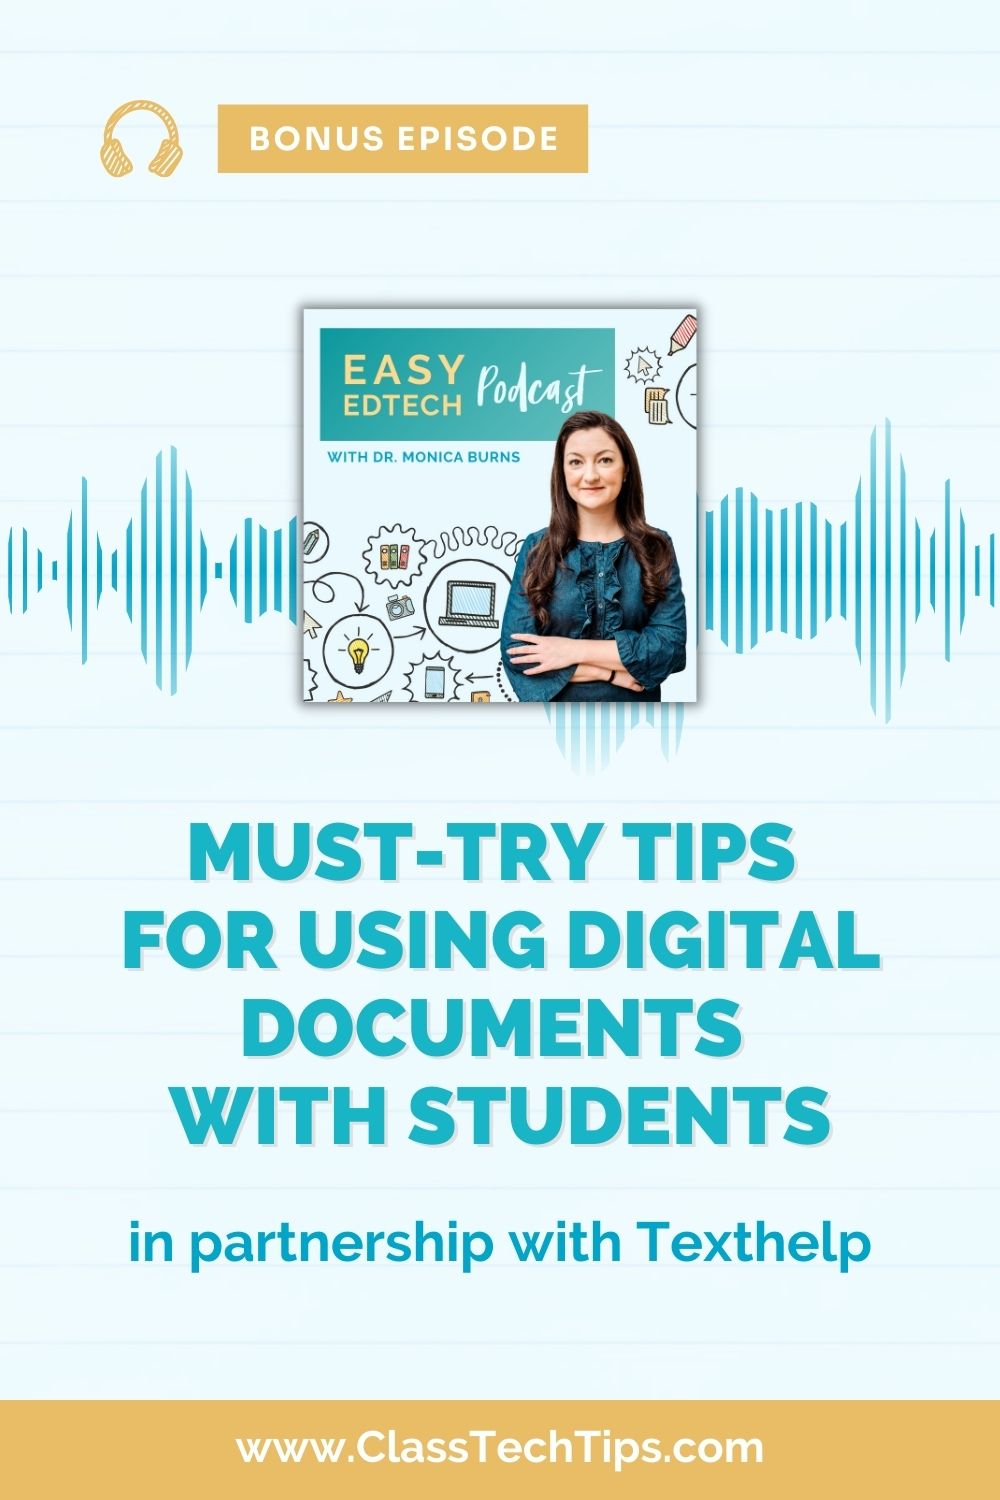 is episode, Jason Carroll from Texthelp joins to share lots of tips for using digital documents with students including accessibility tips.